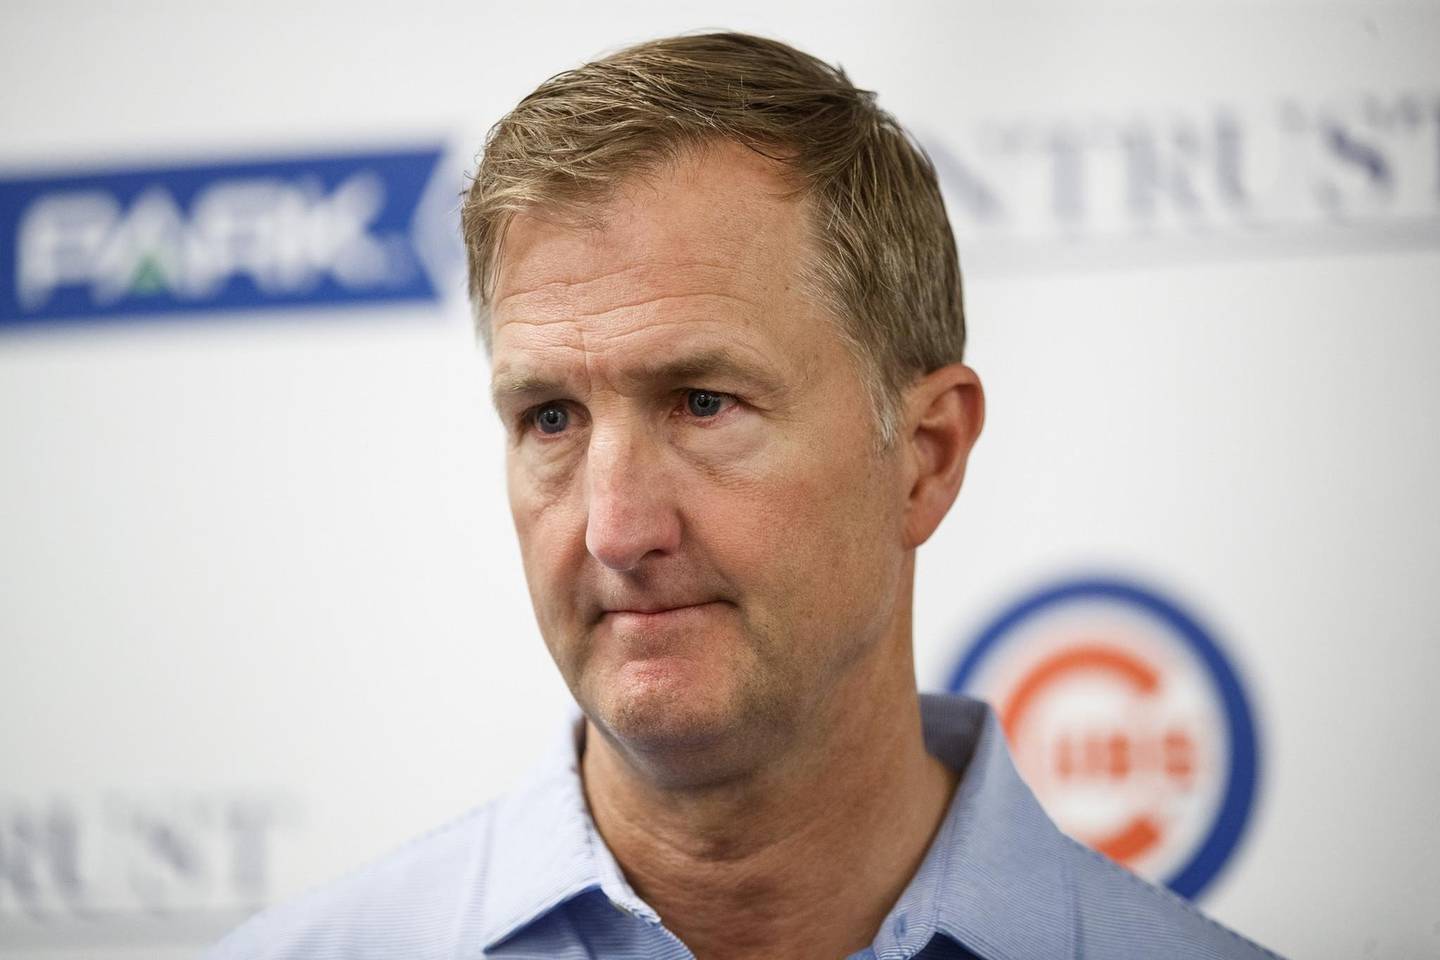 Chicago Cubs president of business operations, Crane Kenney, talks with members of the press before the Cubs first full squad workout of spring training at sloan park Monday Feb. 17, 2020 in Mesa, Ariz. (Armando L. Sanchez/Chicago Tribune)